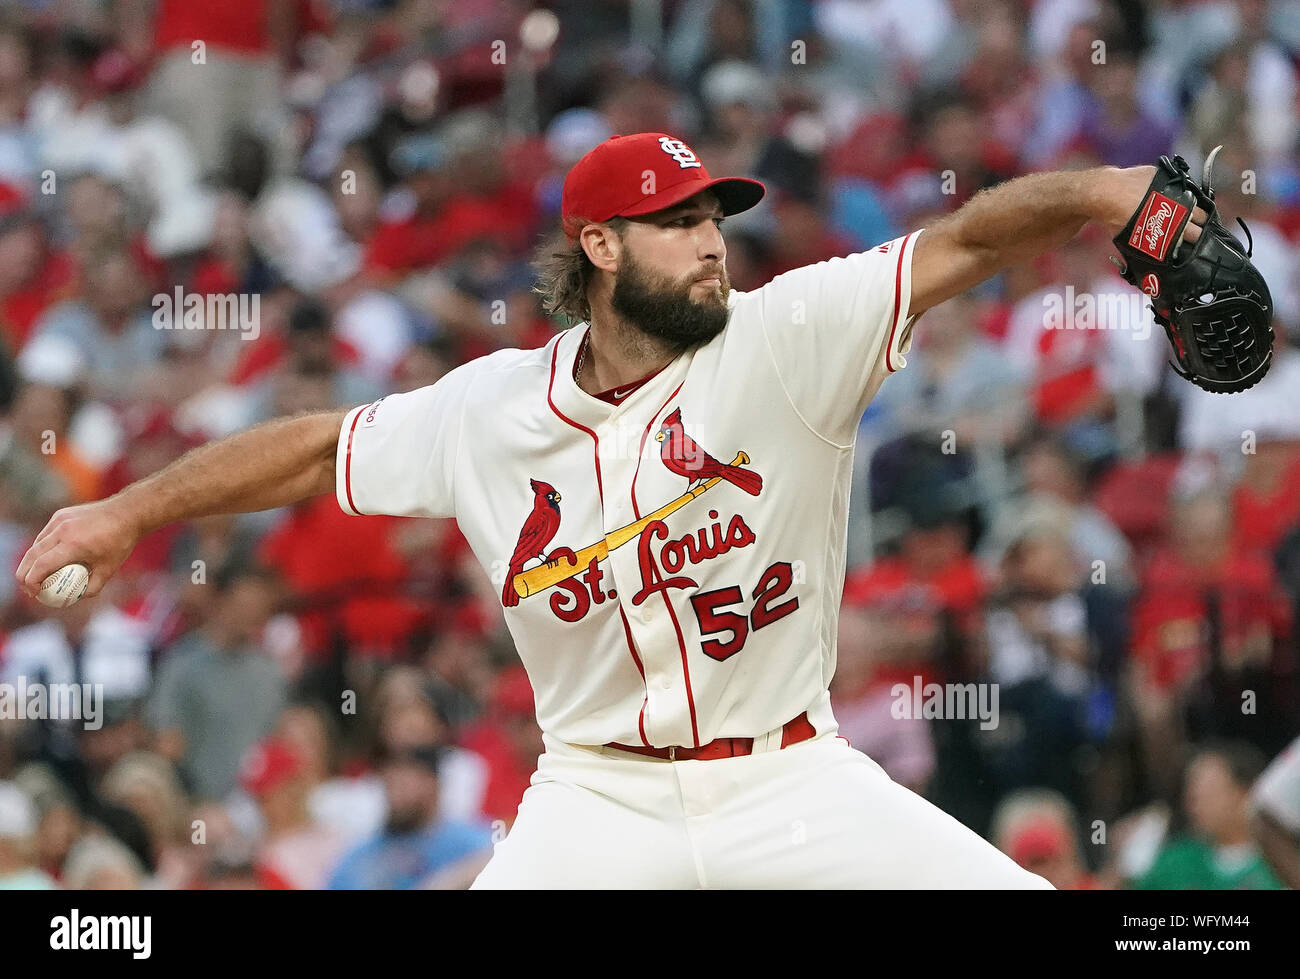 St. Louis Cardinals starting pitcher Michael Wacha delivers a pitch to the Cincinnati Reds in the second inning in Game 2 of their double header at Busch Stadium in St. Louis on Saturday, August 31, 2019. Photo by Bill Greenblatt /UPI Stock Photo